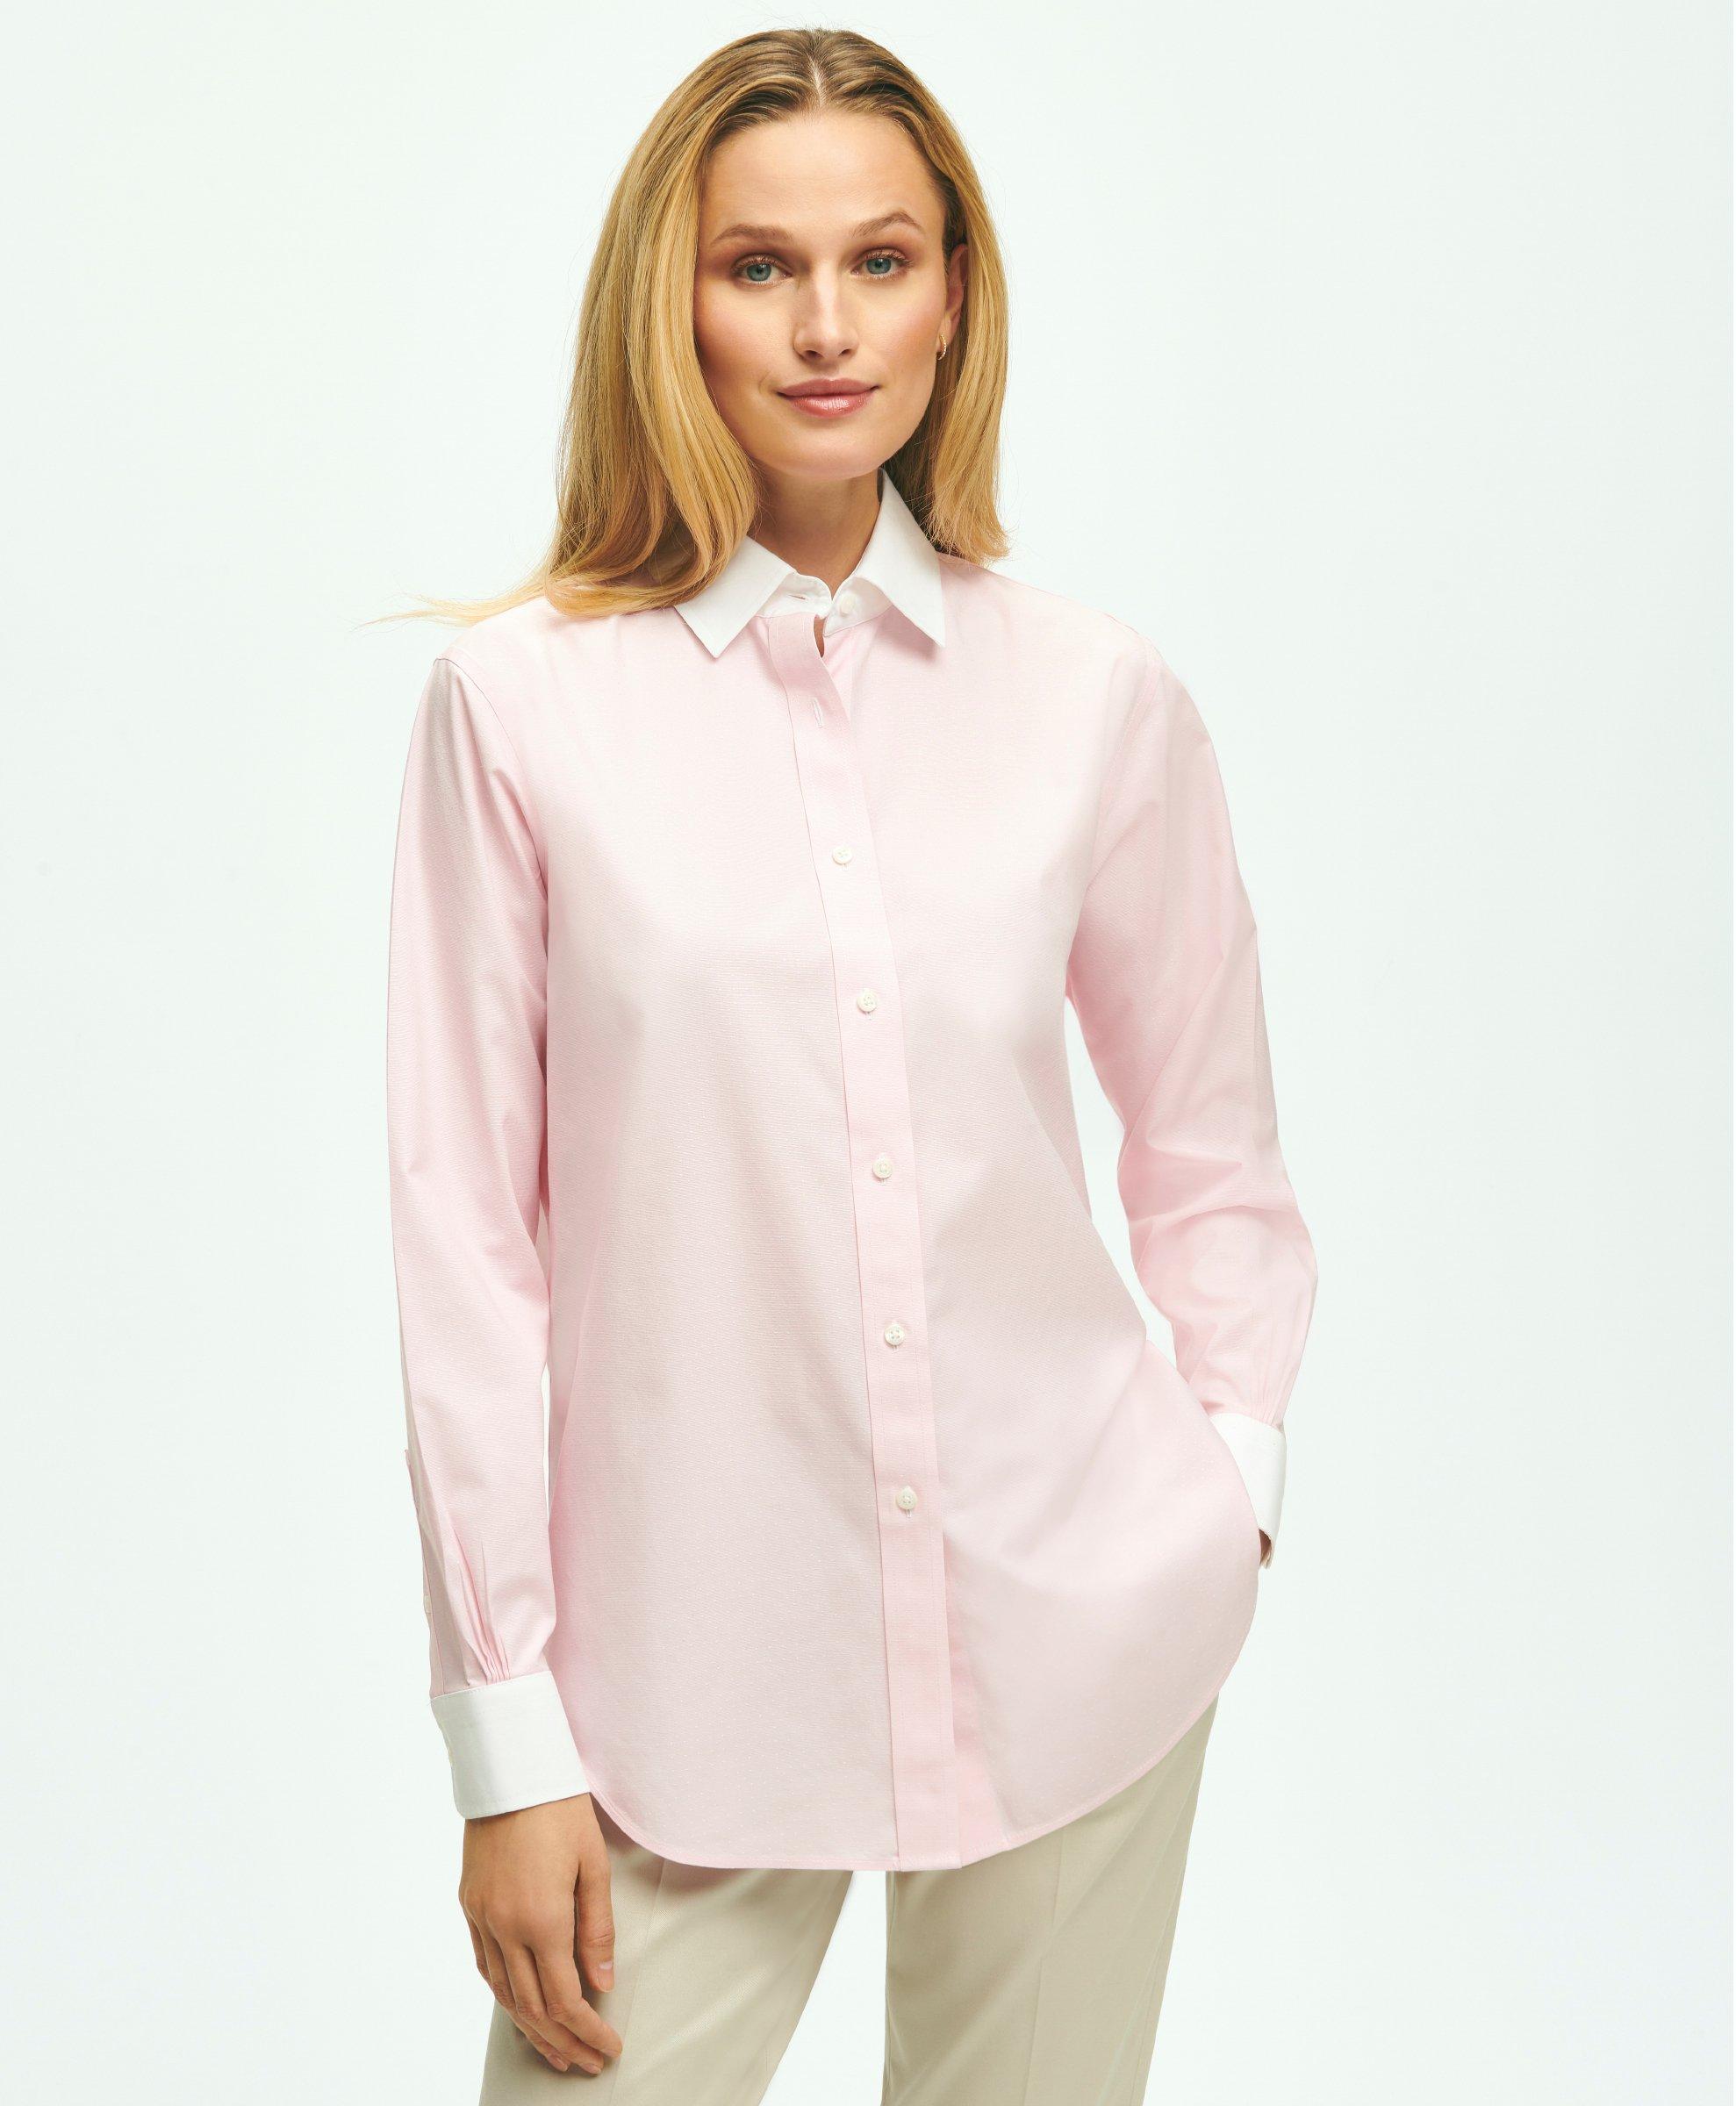 Brooks Brothers Relaxed Fit Non-iron Stretch Supima Cotton Shirt With White Collar & Cuffs | Dark Pink | Size 10